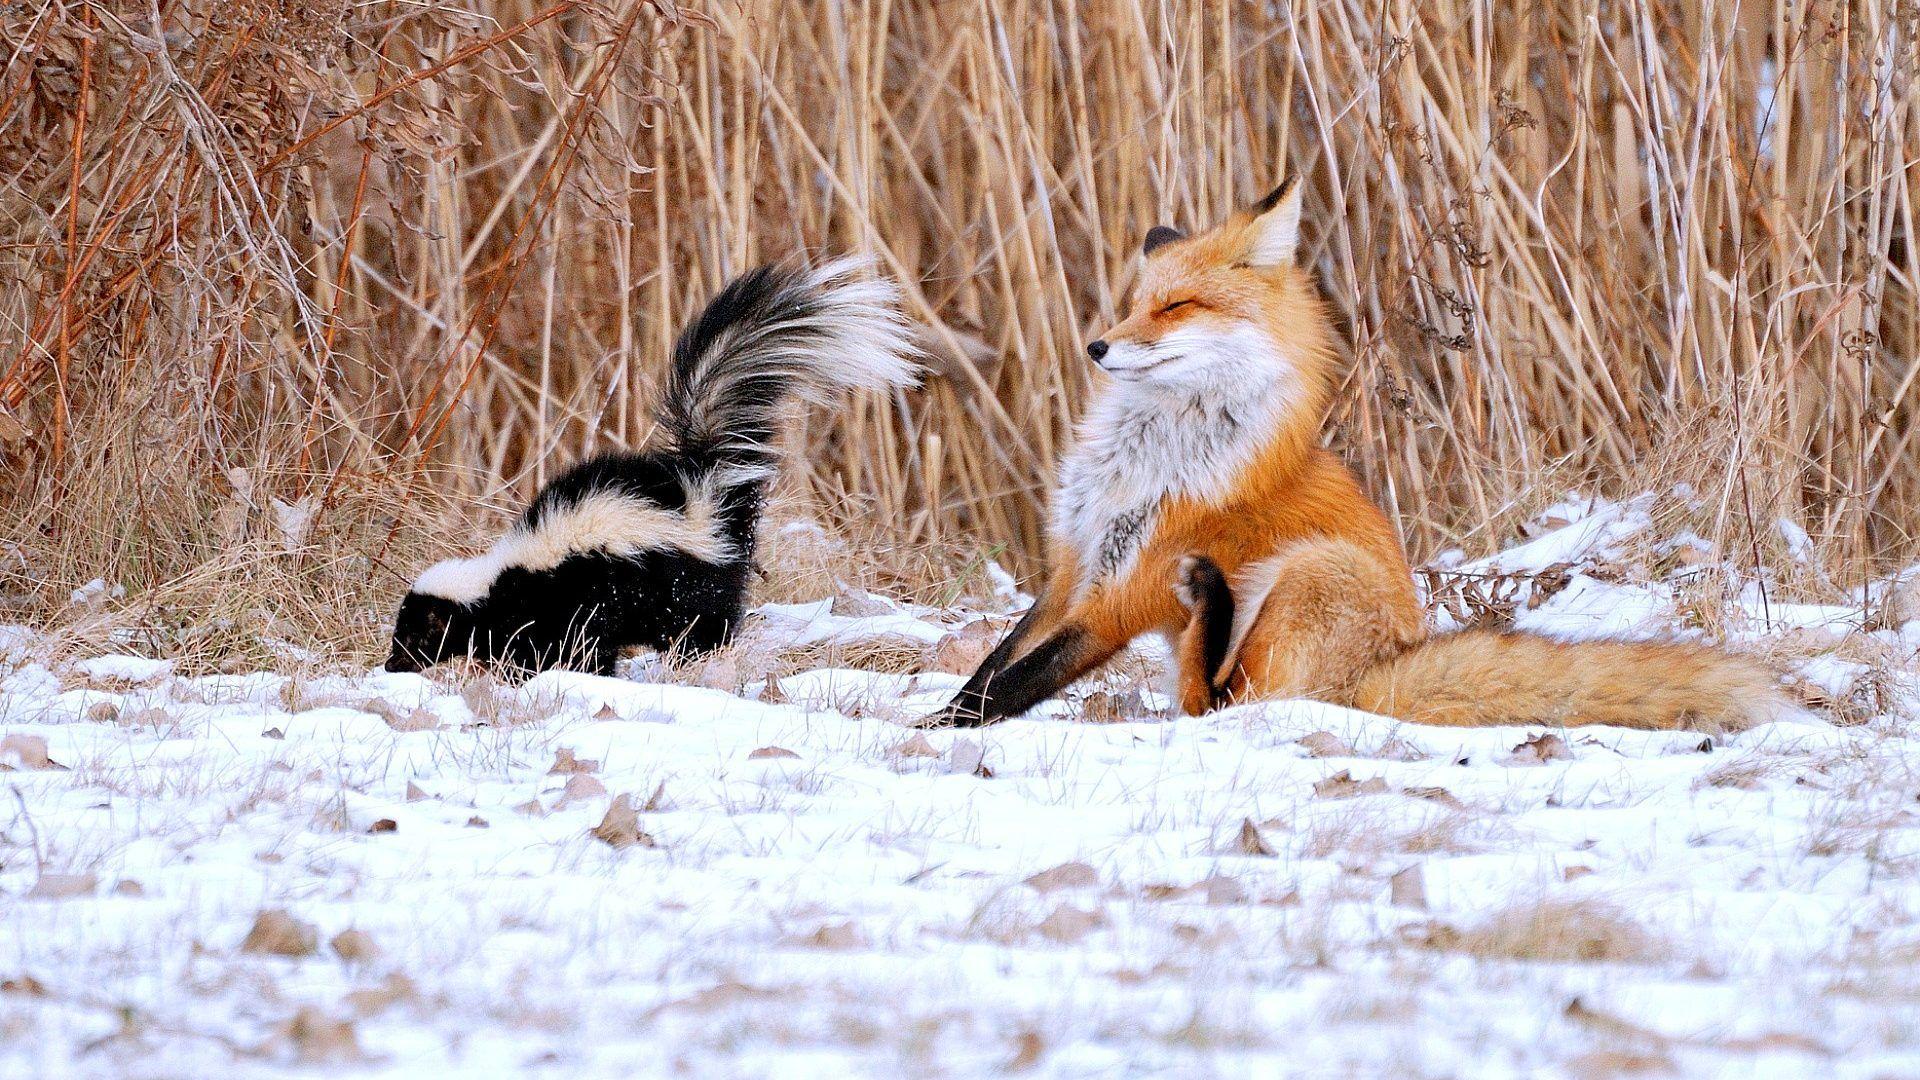 Other: Snow Nature Skunk Fox Desktop Background for HD 16:9 High